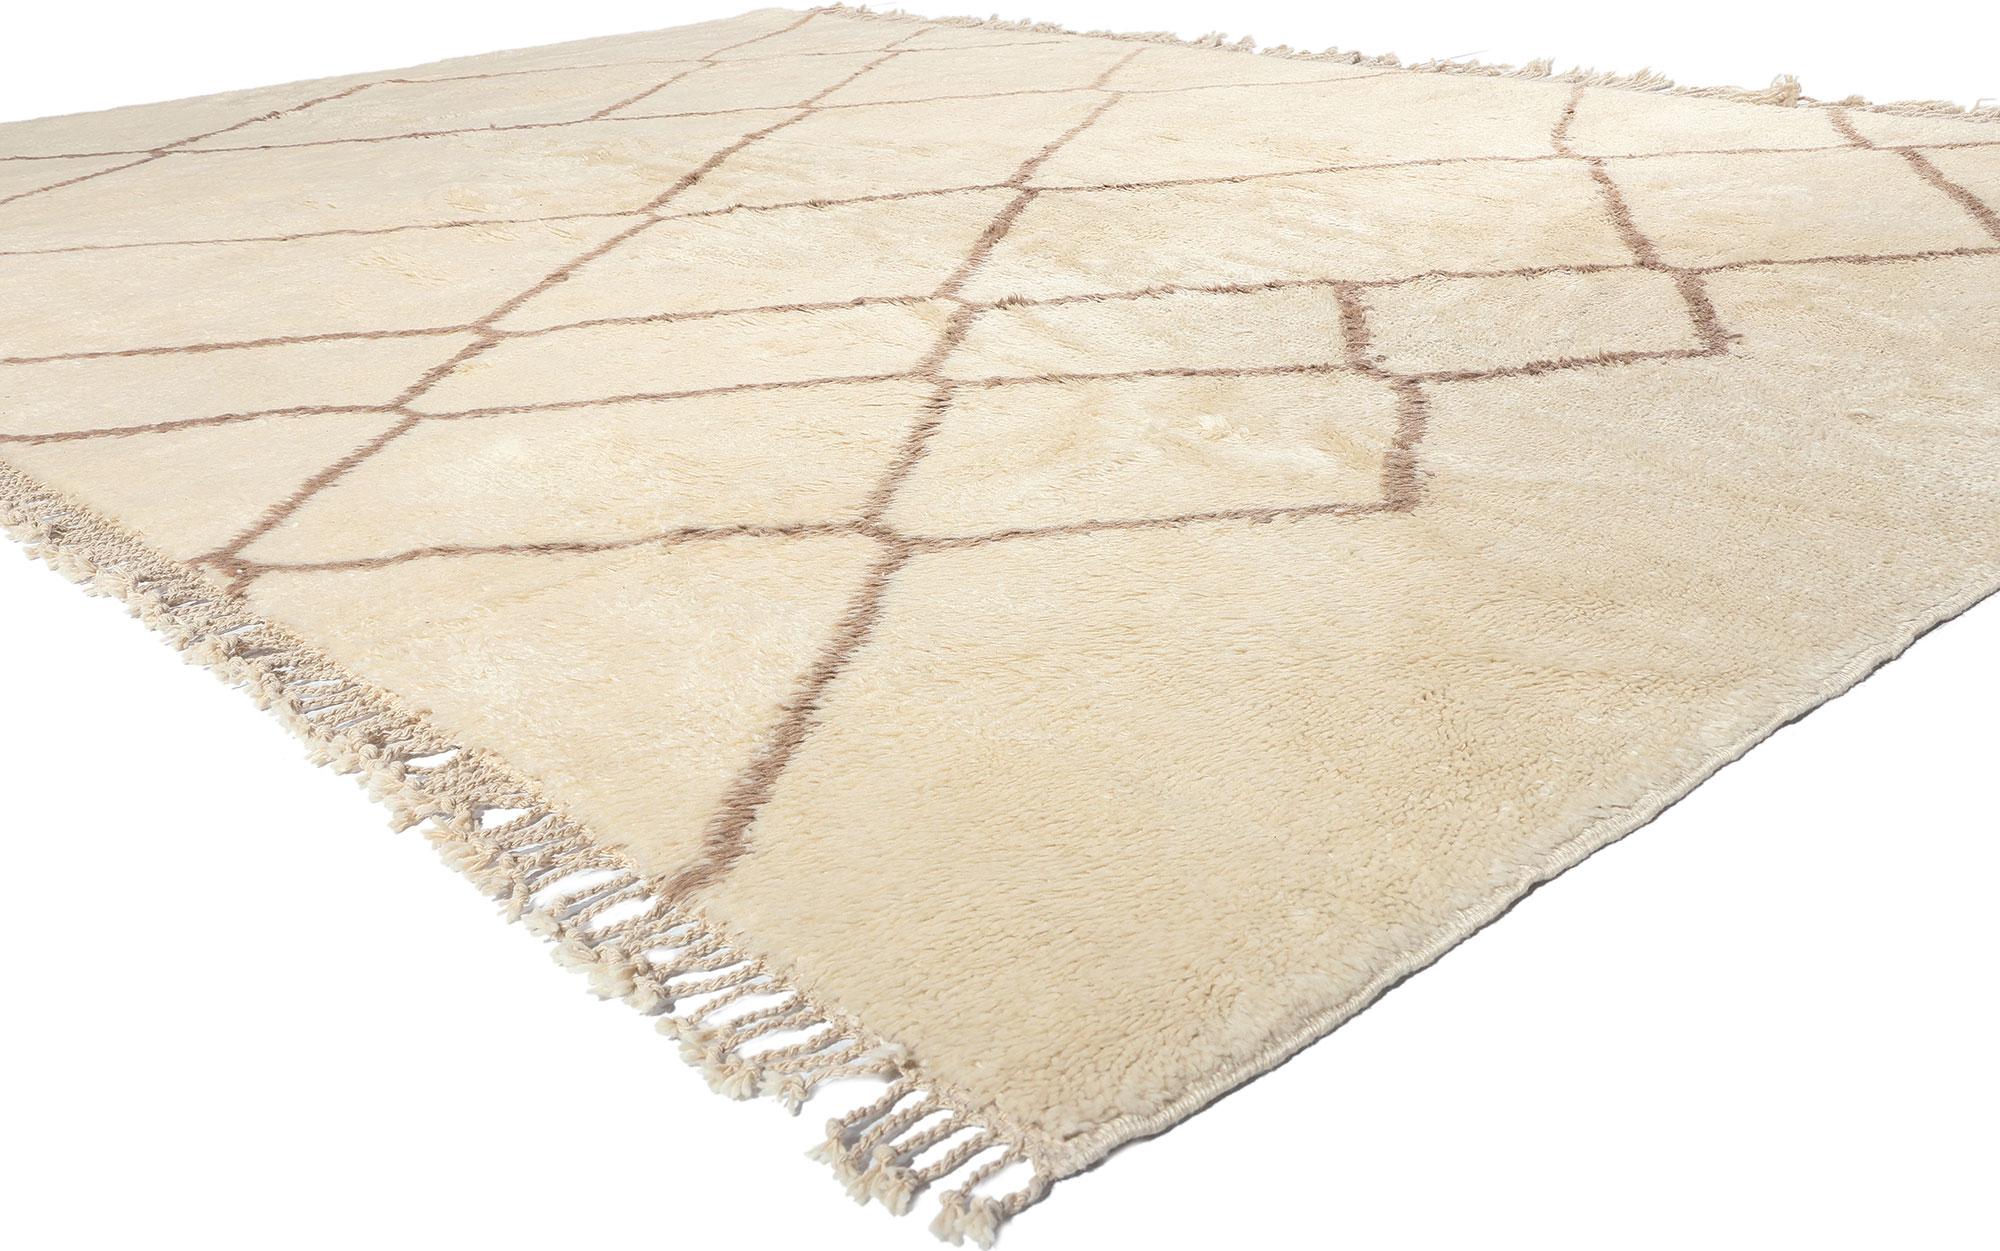 78233 Large Moroccan Beni Ourain Rug, 12'09 x 08'07. Originating from the esteemed Beni Ourain tribe in Morocco, these exquisitely crafted rugs pay homage to tradition through their meticulous craftsmanship. Utilizing untreated sheep's wool, they